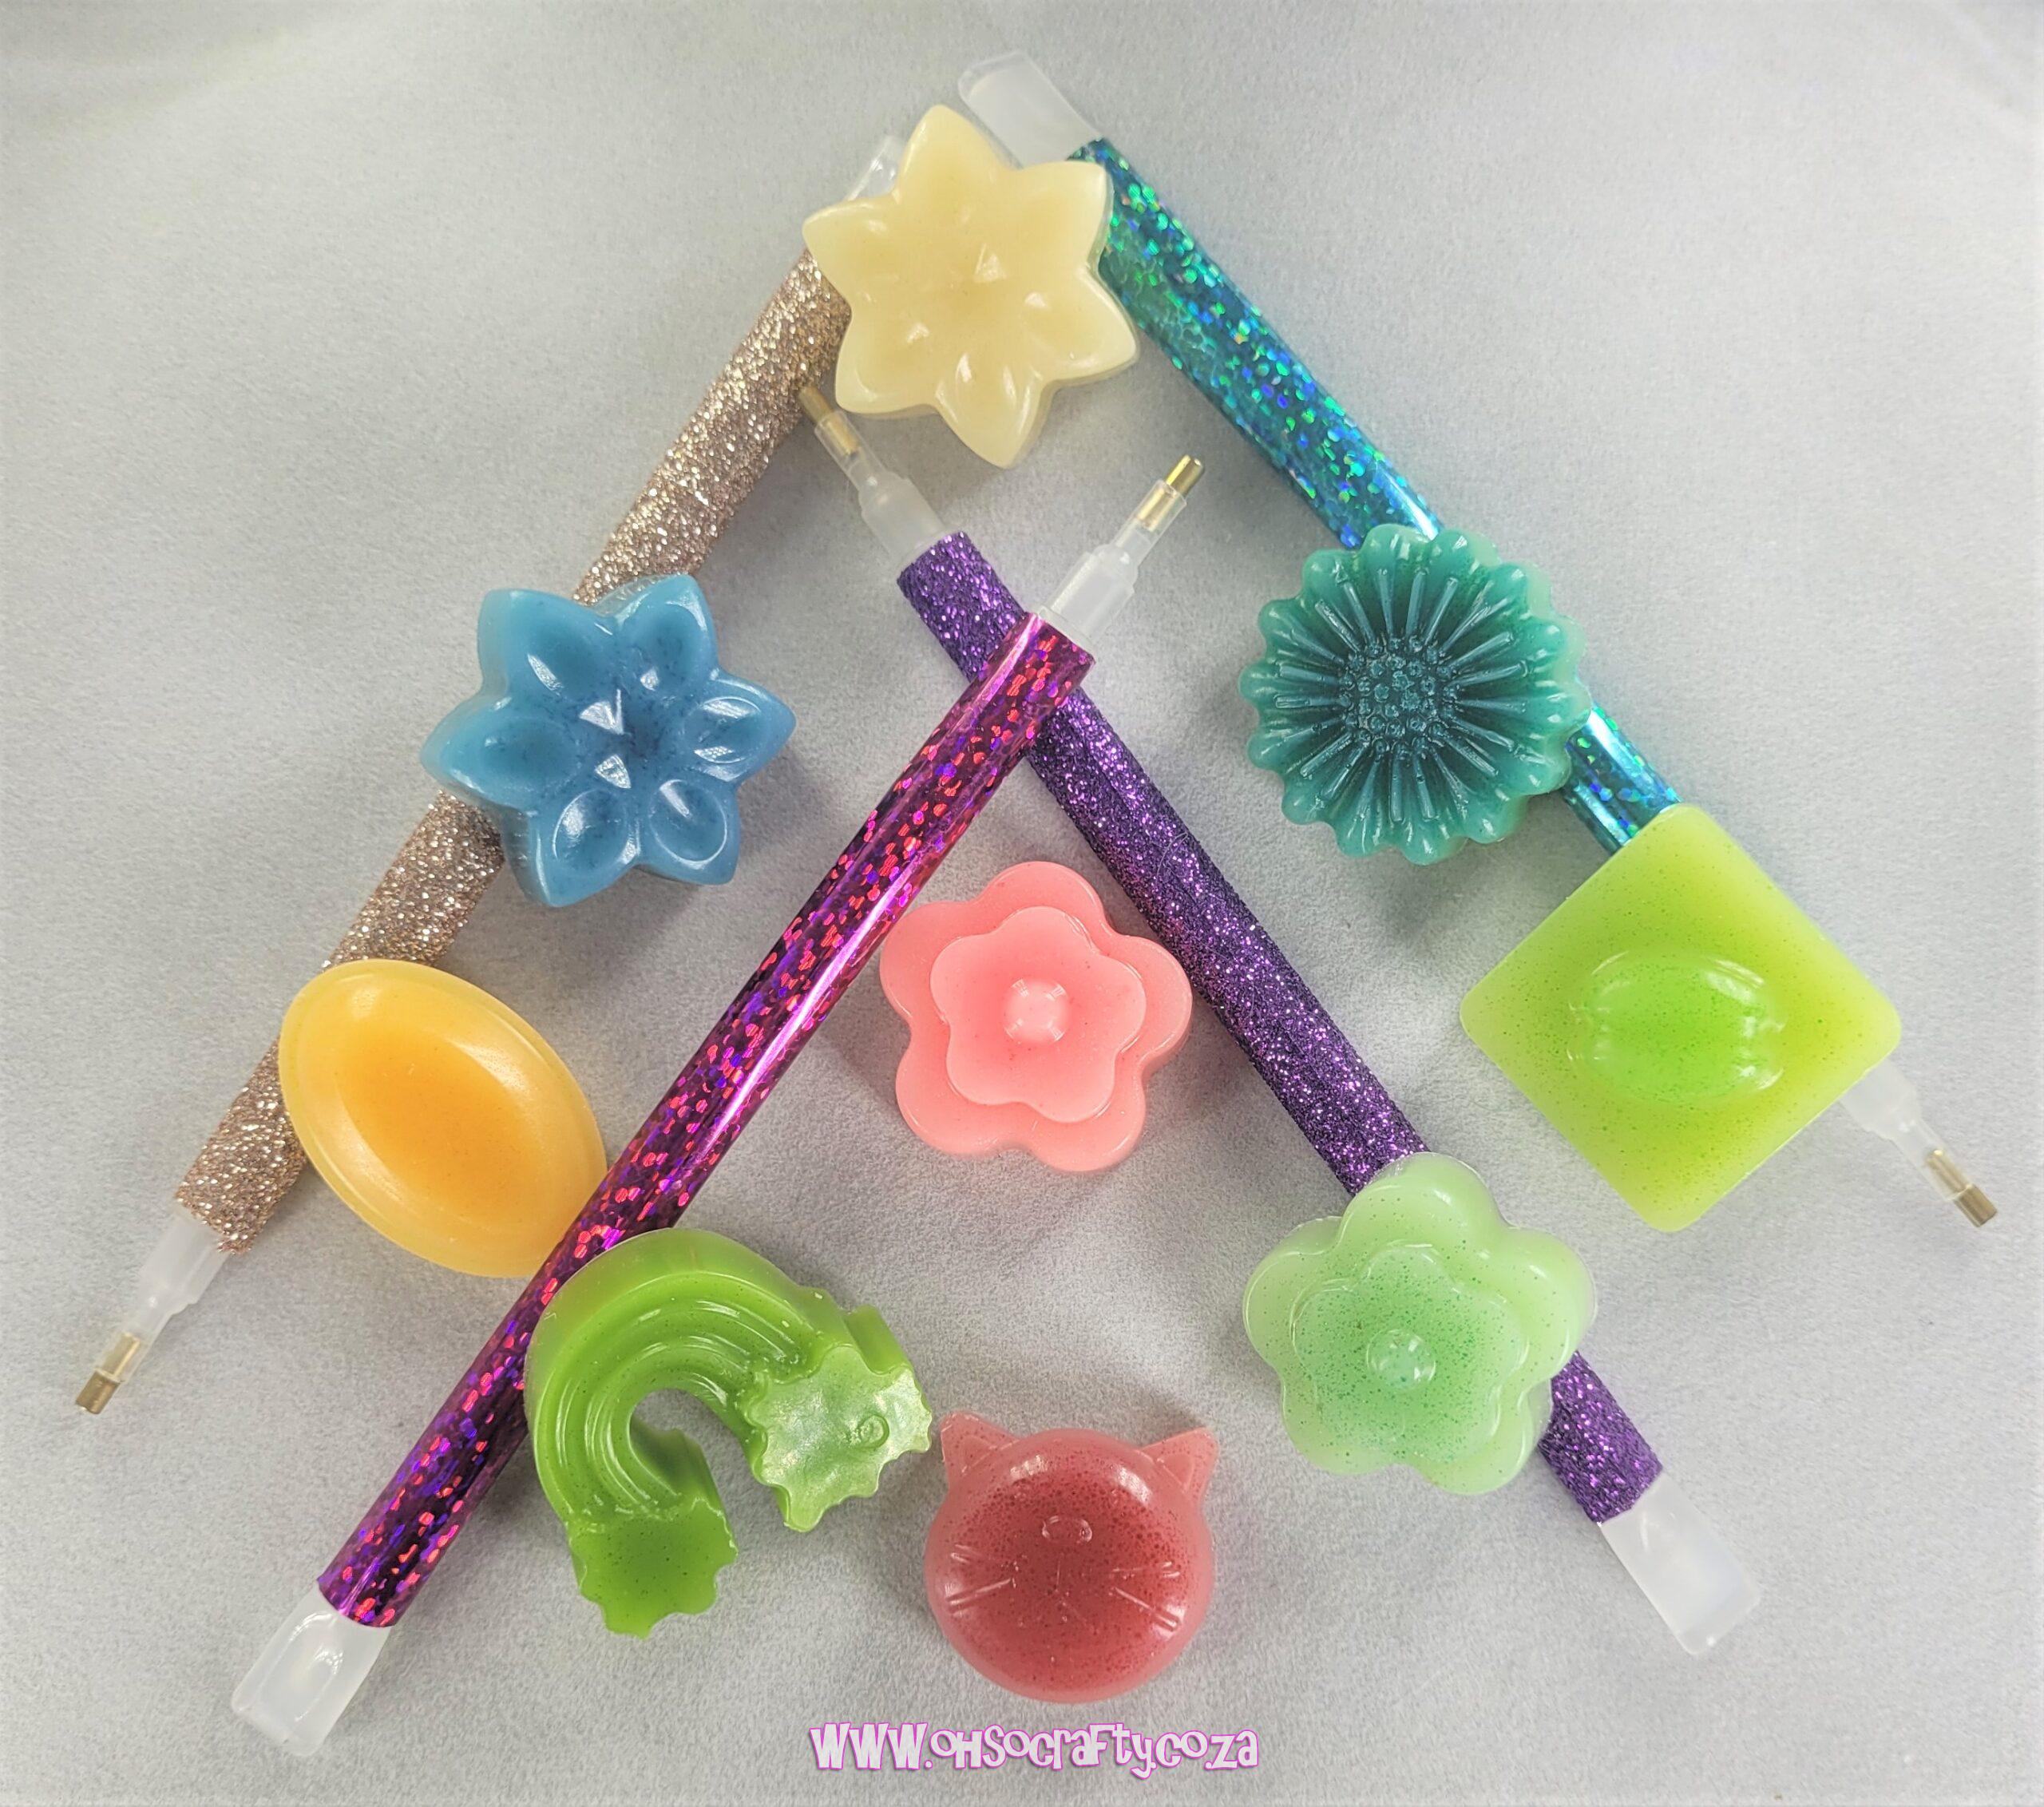 Hard, Scented Wax for Diamond Painting - 20 scents to choose from, includes  glitter/loopy pen! - OHsoCrafty